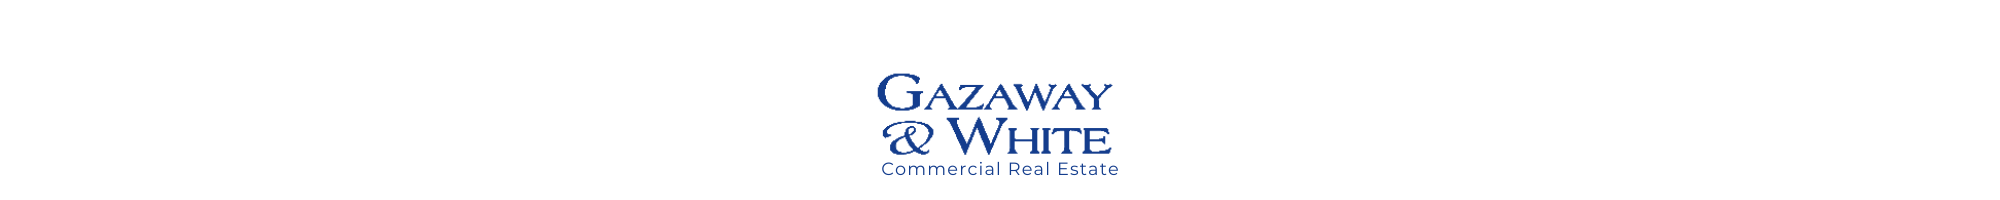 Gazaway & White Commercial Real Estate